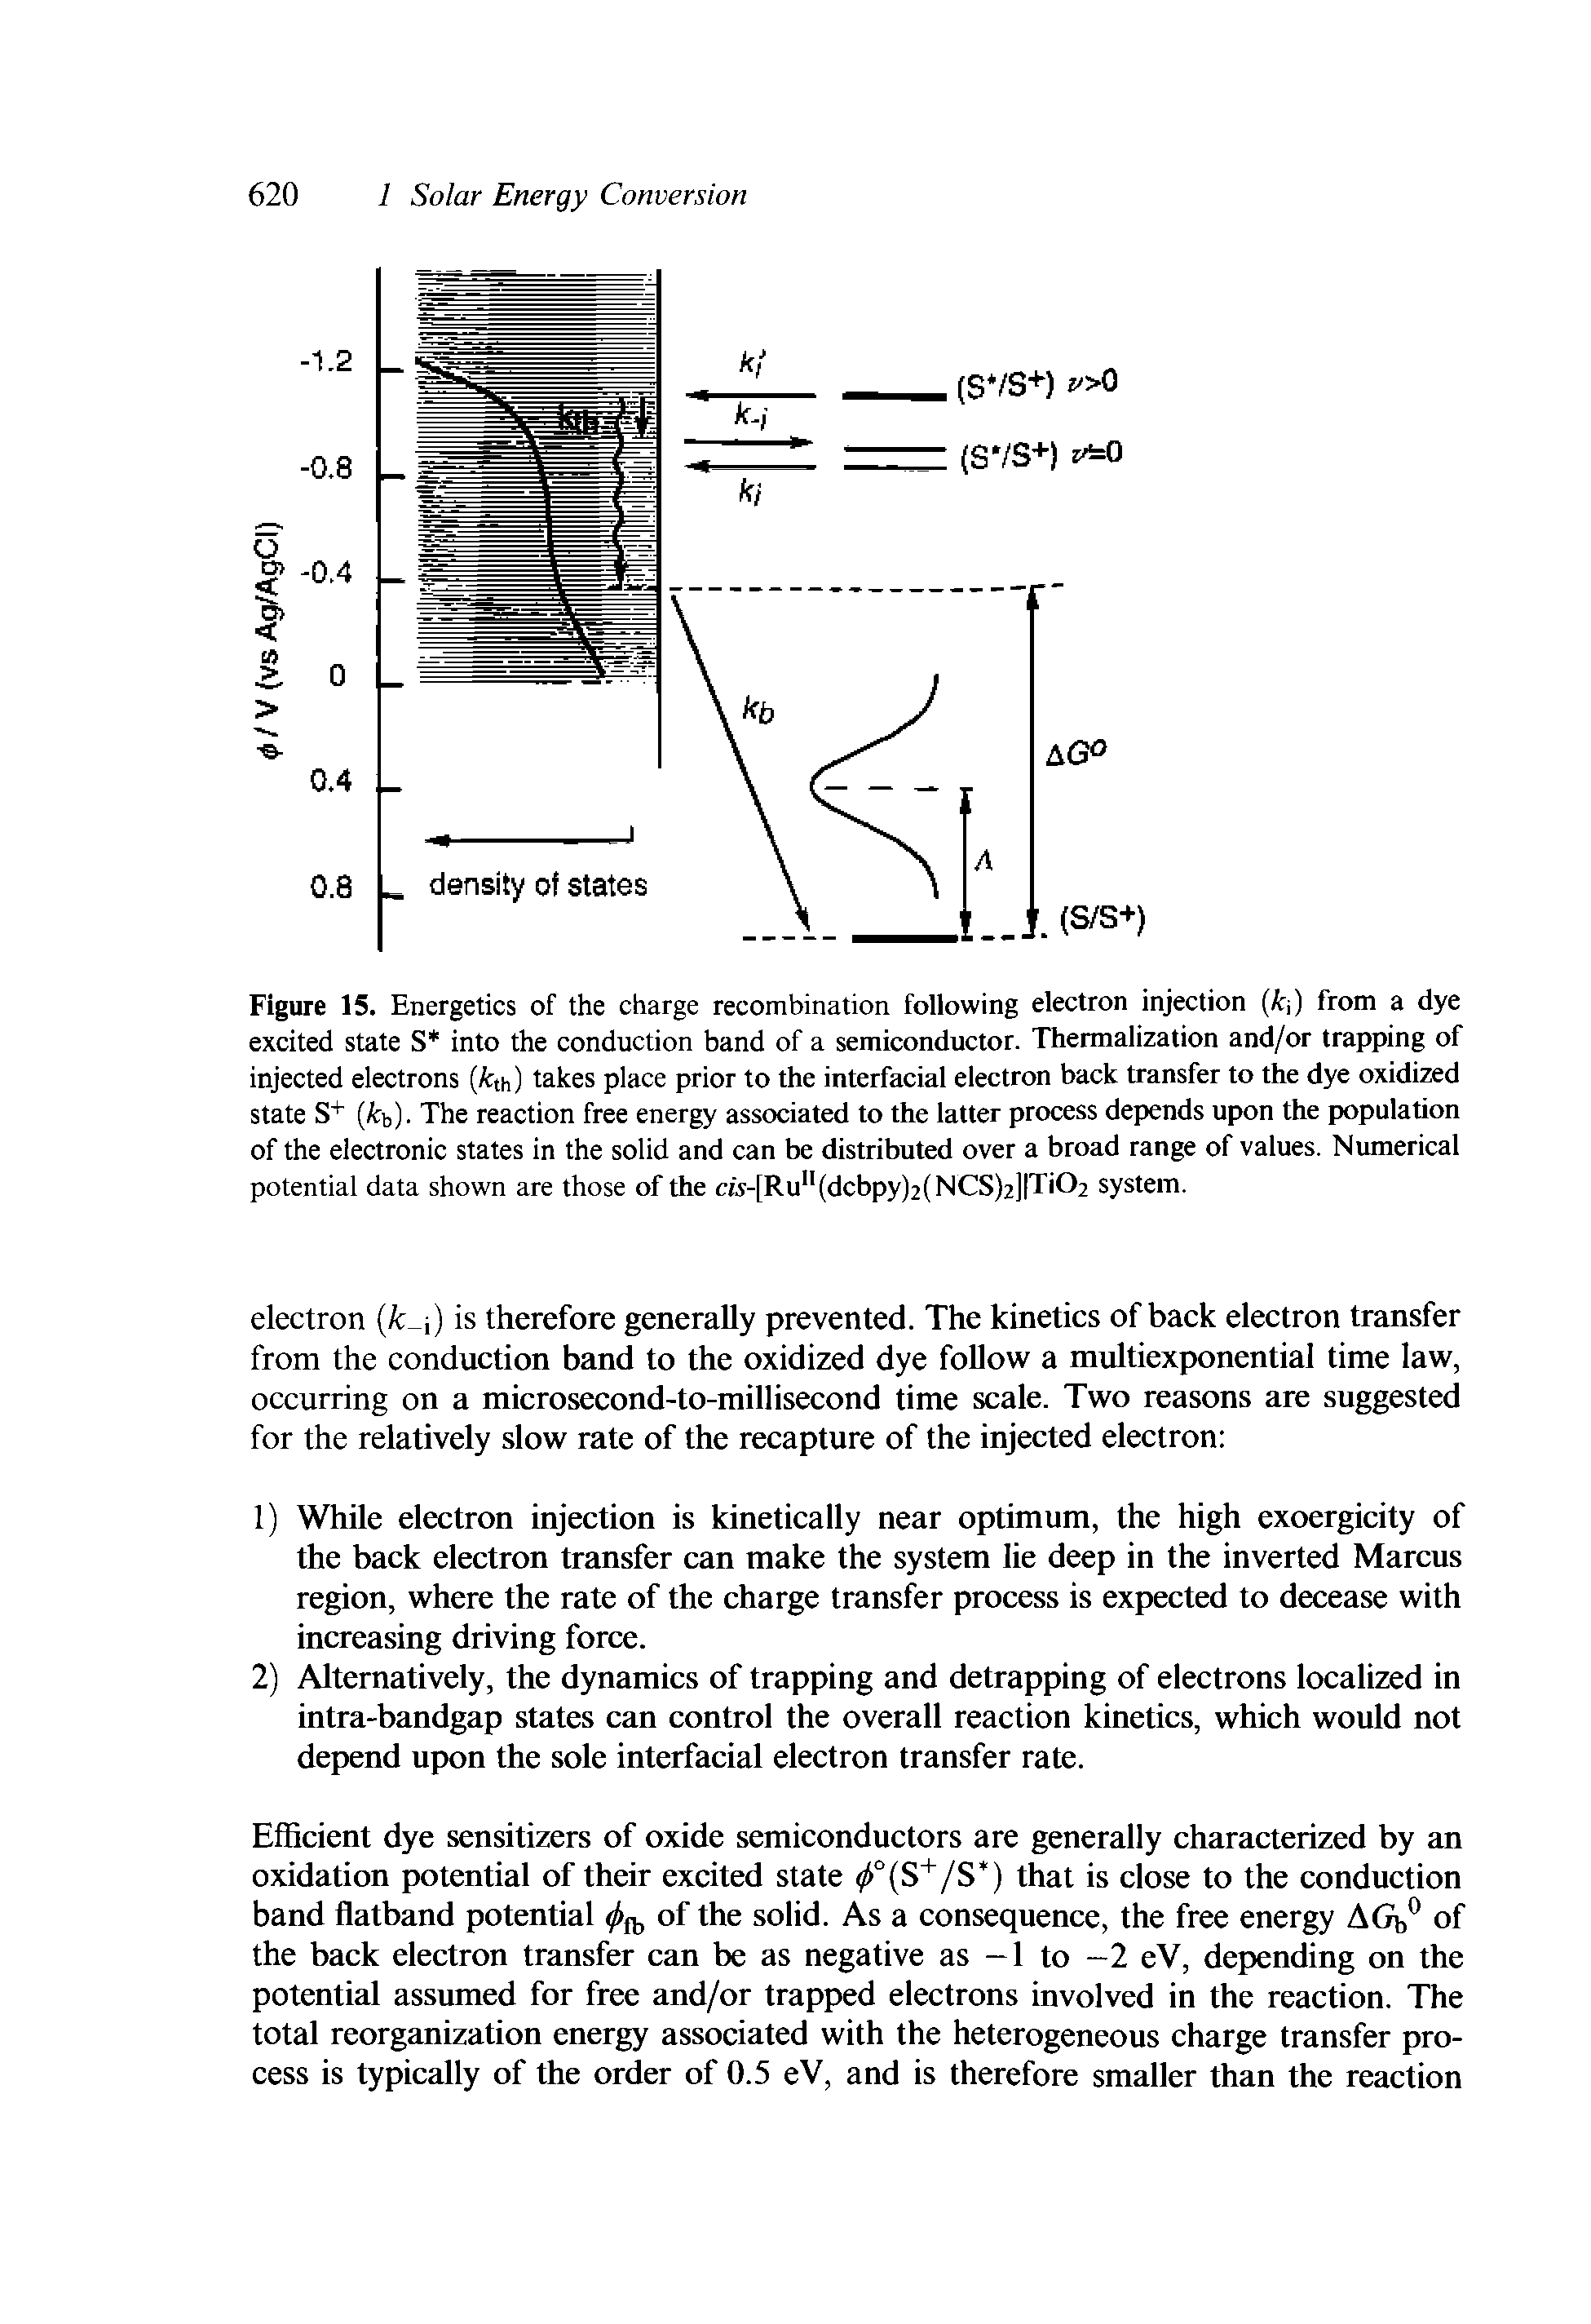 Figure 15. Energetics of the charge recombination following electron injection (/ i) from a dye excited state S into the conduction band of a semiconductor. Thermalization and/or trapping of injected electrons (Mh) takes place prior to the interfacial electron back transfer to the dye oxidized state S (/cb). The reaction free energy associated to the latter process depends upon the population of the electronic states in the solid and can be distributed over a broad range of values. Numerical potential data shown are those of the c/s-[Ru (dcbpy)2(NCS)2] Ti02 system.